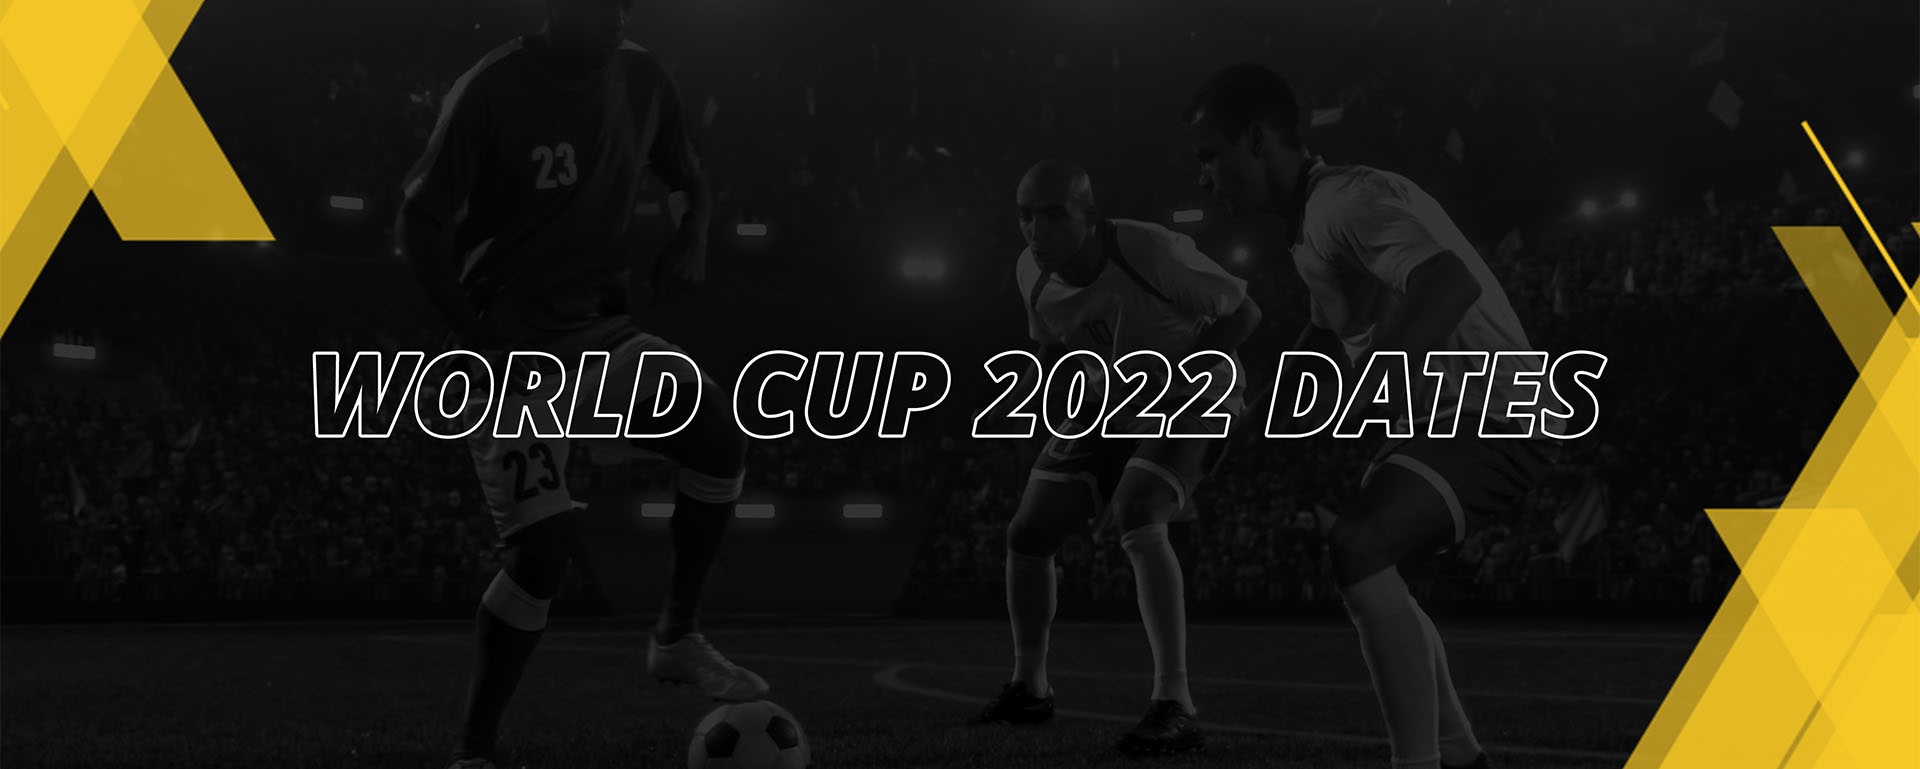 WORLD CUP 2022 DATES